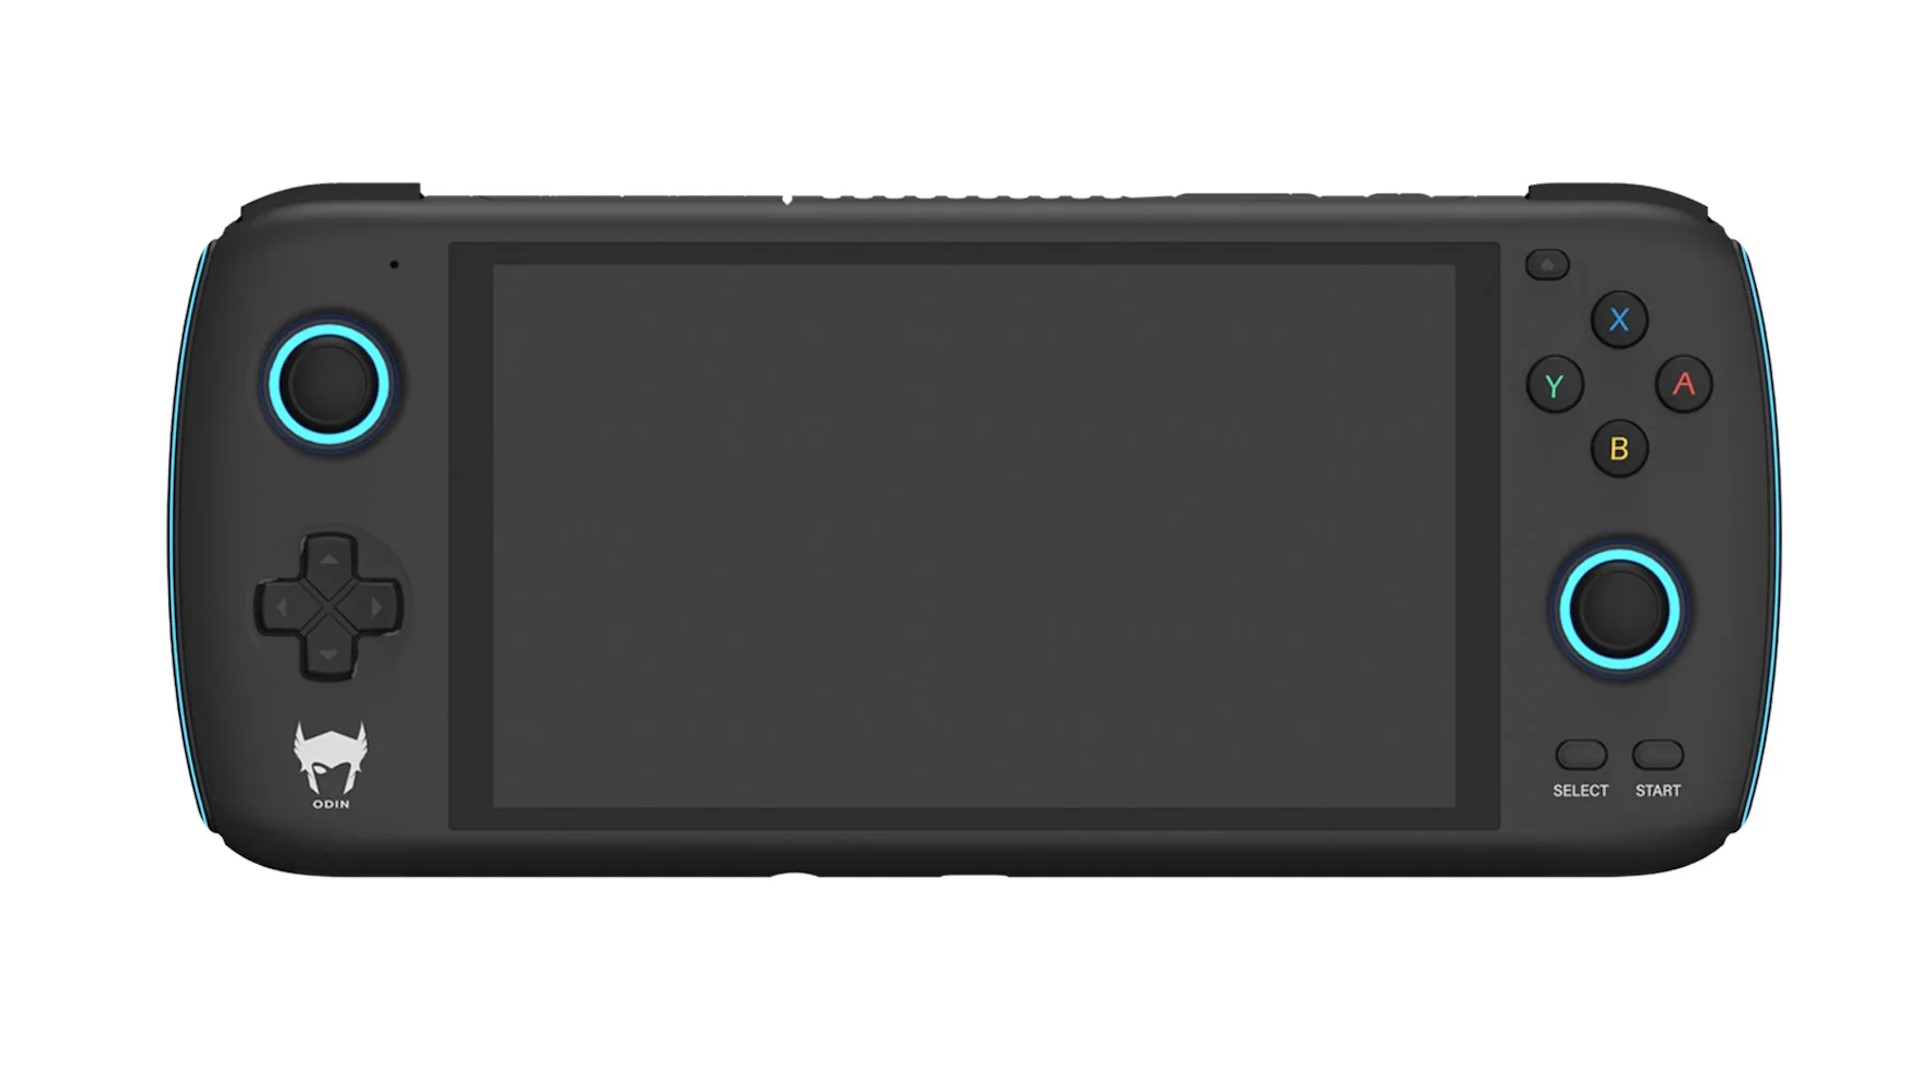 AYN Odin Pro Android retro gaming handheld